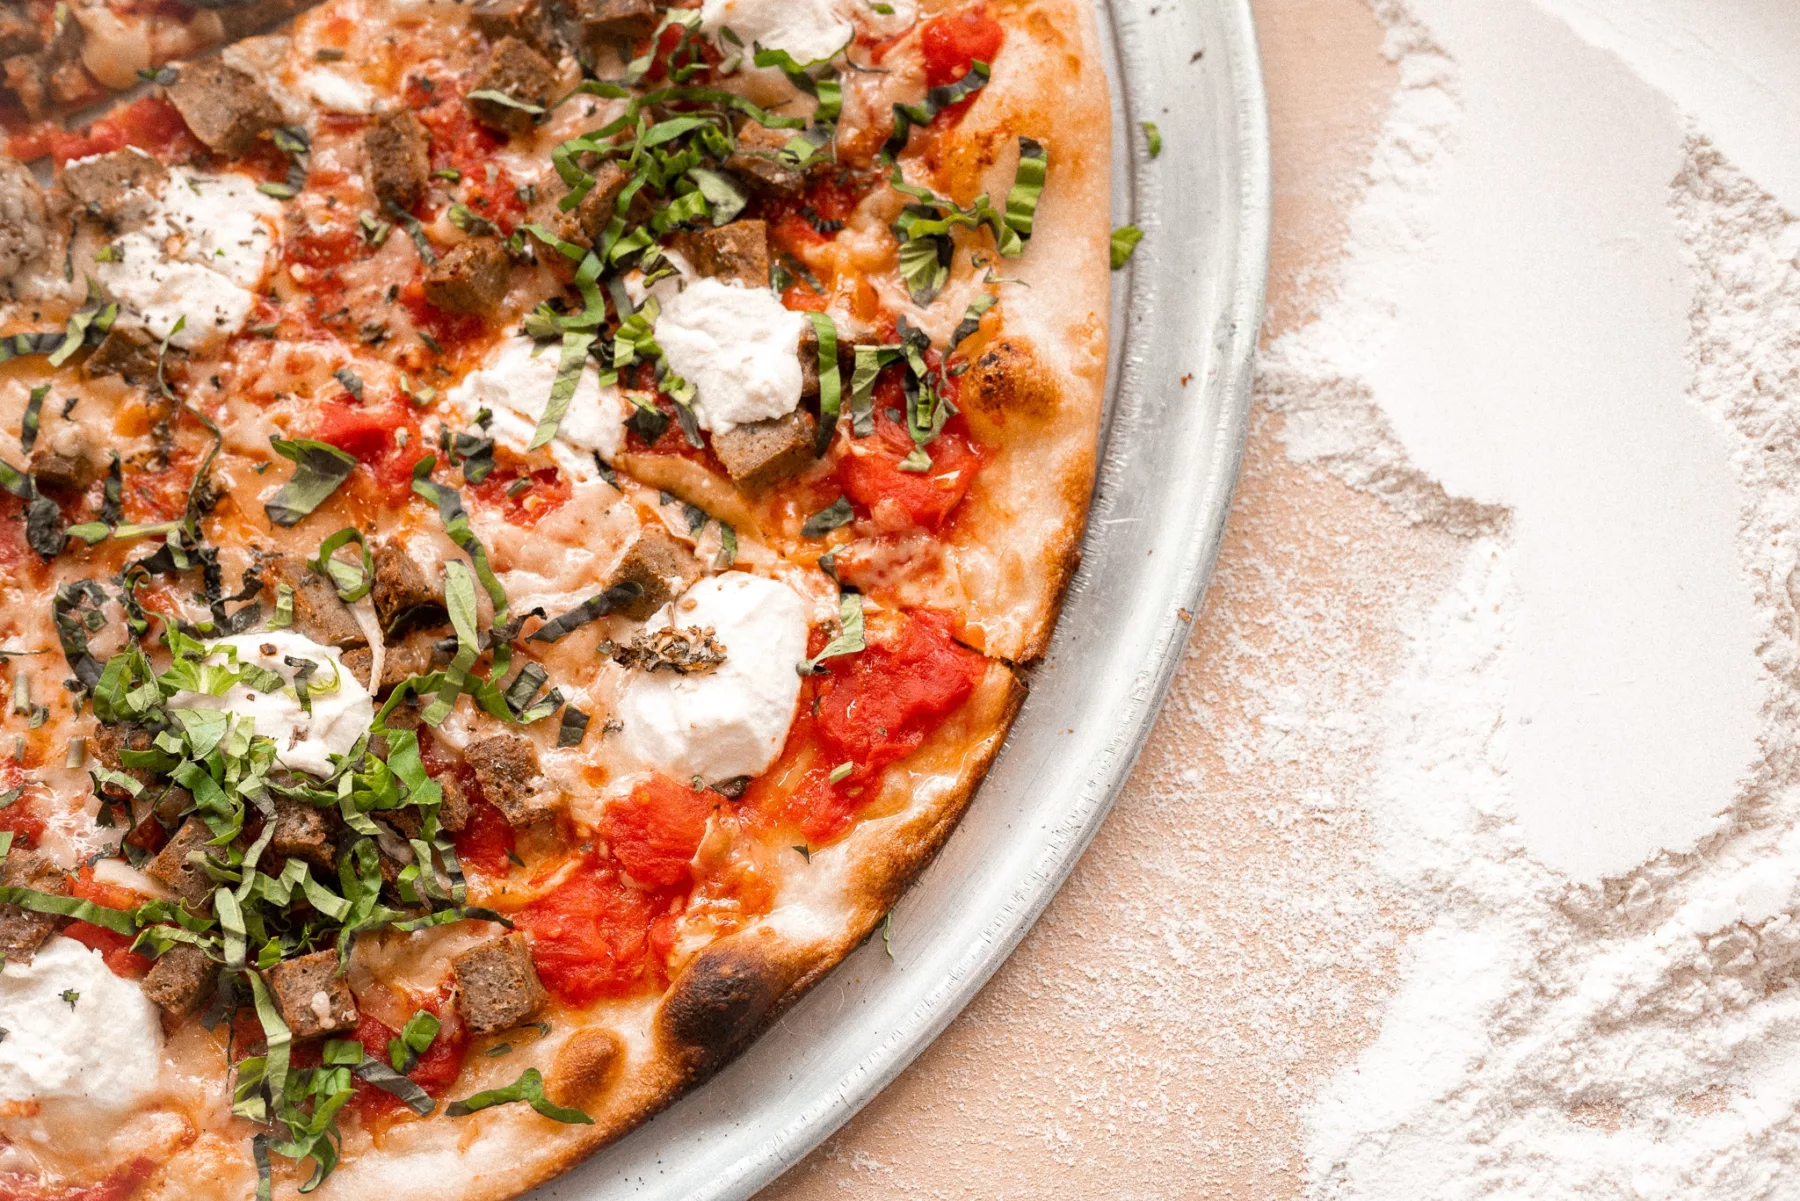 Top Pizzerias in Boston: Love at First Bite